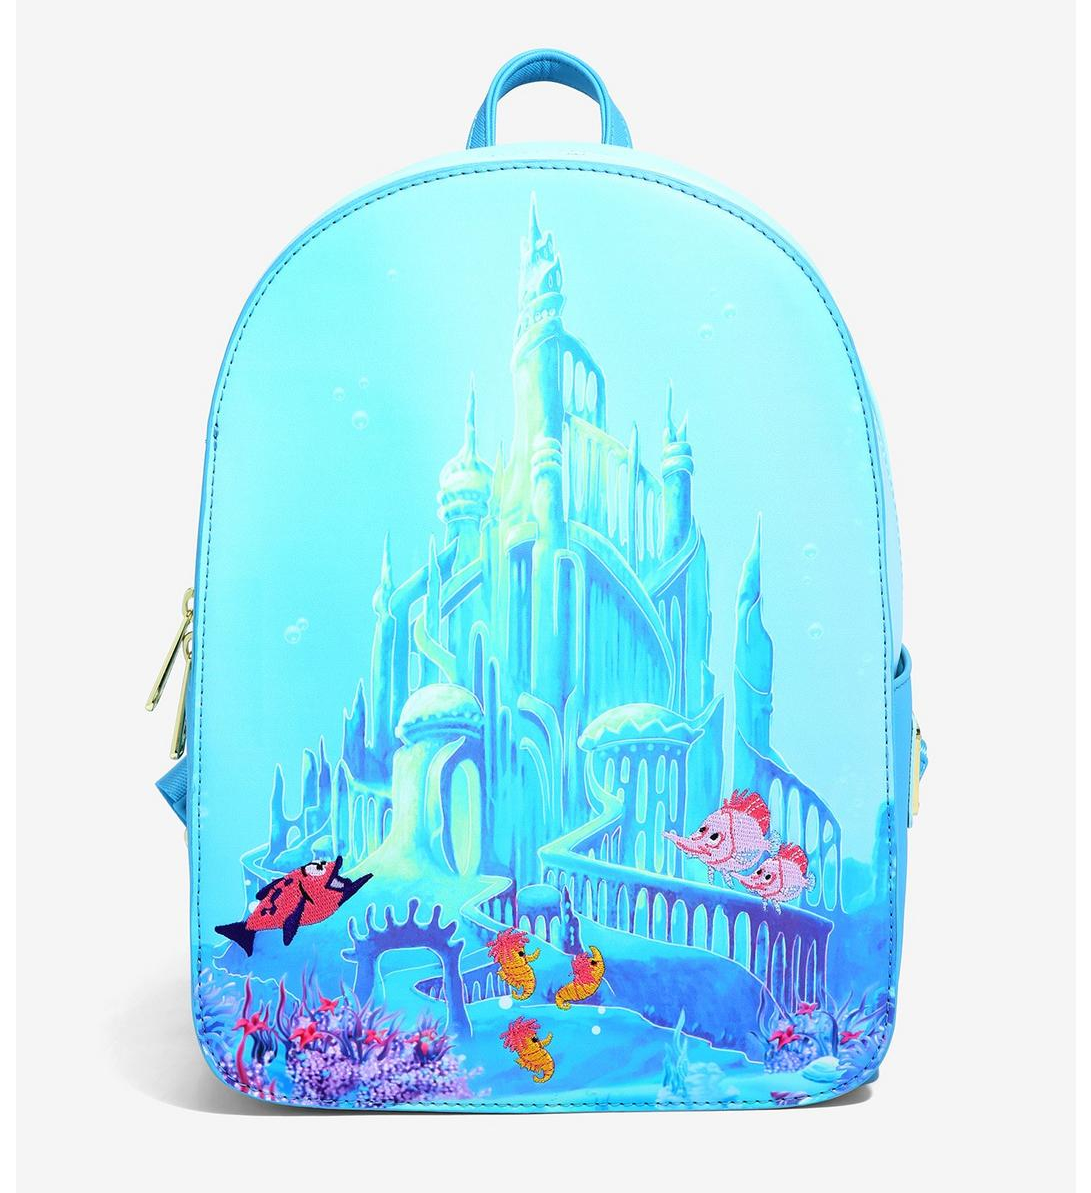 Buy Cinderella Exclusive Holiday Castle Light Up Mini Backpack at Loungefly.